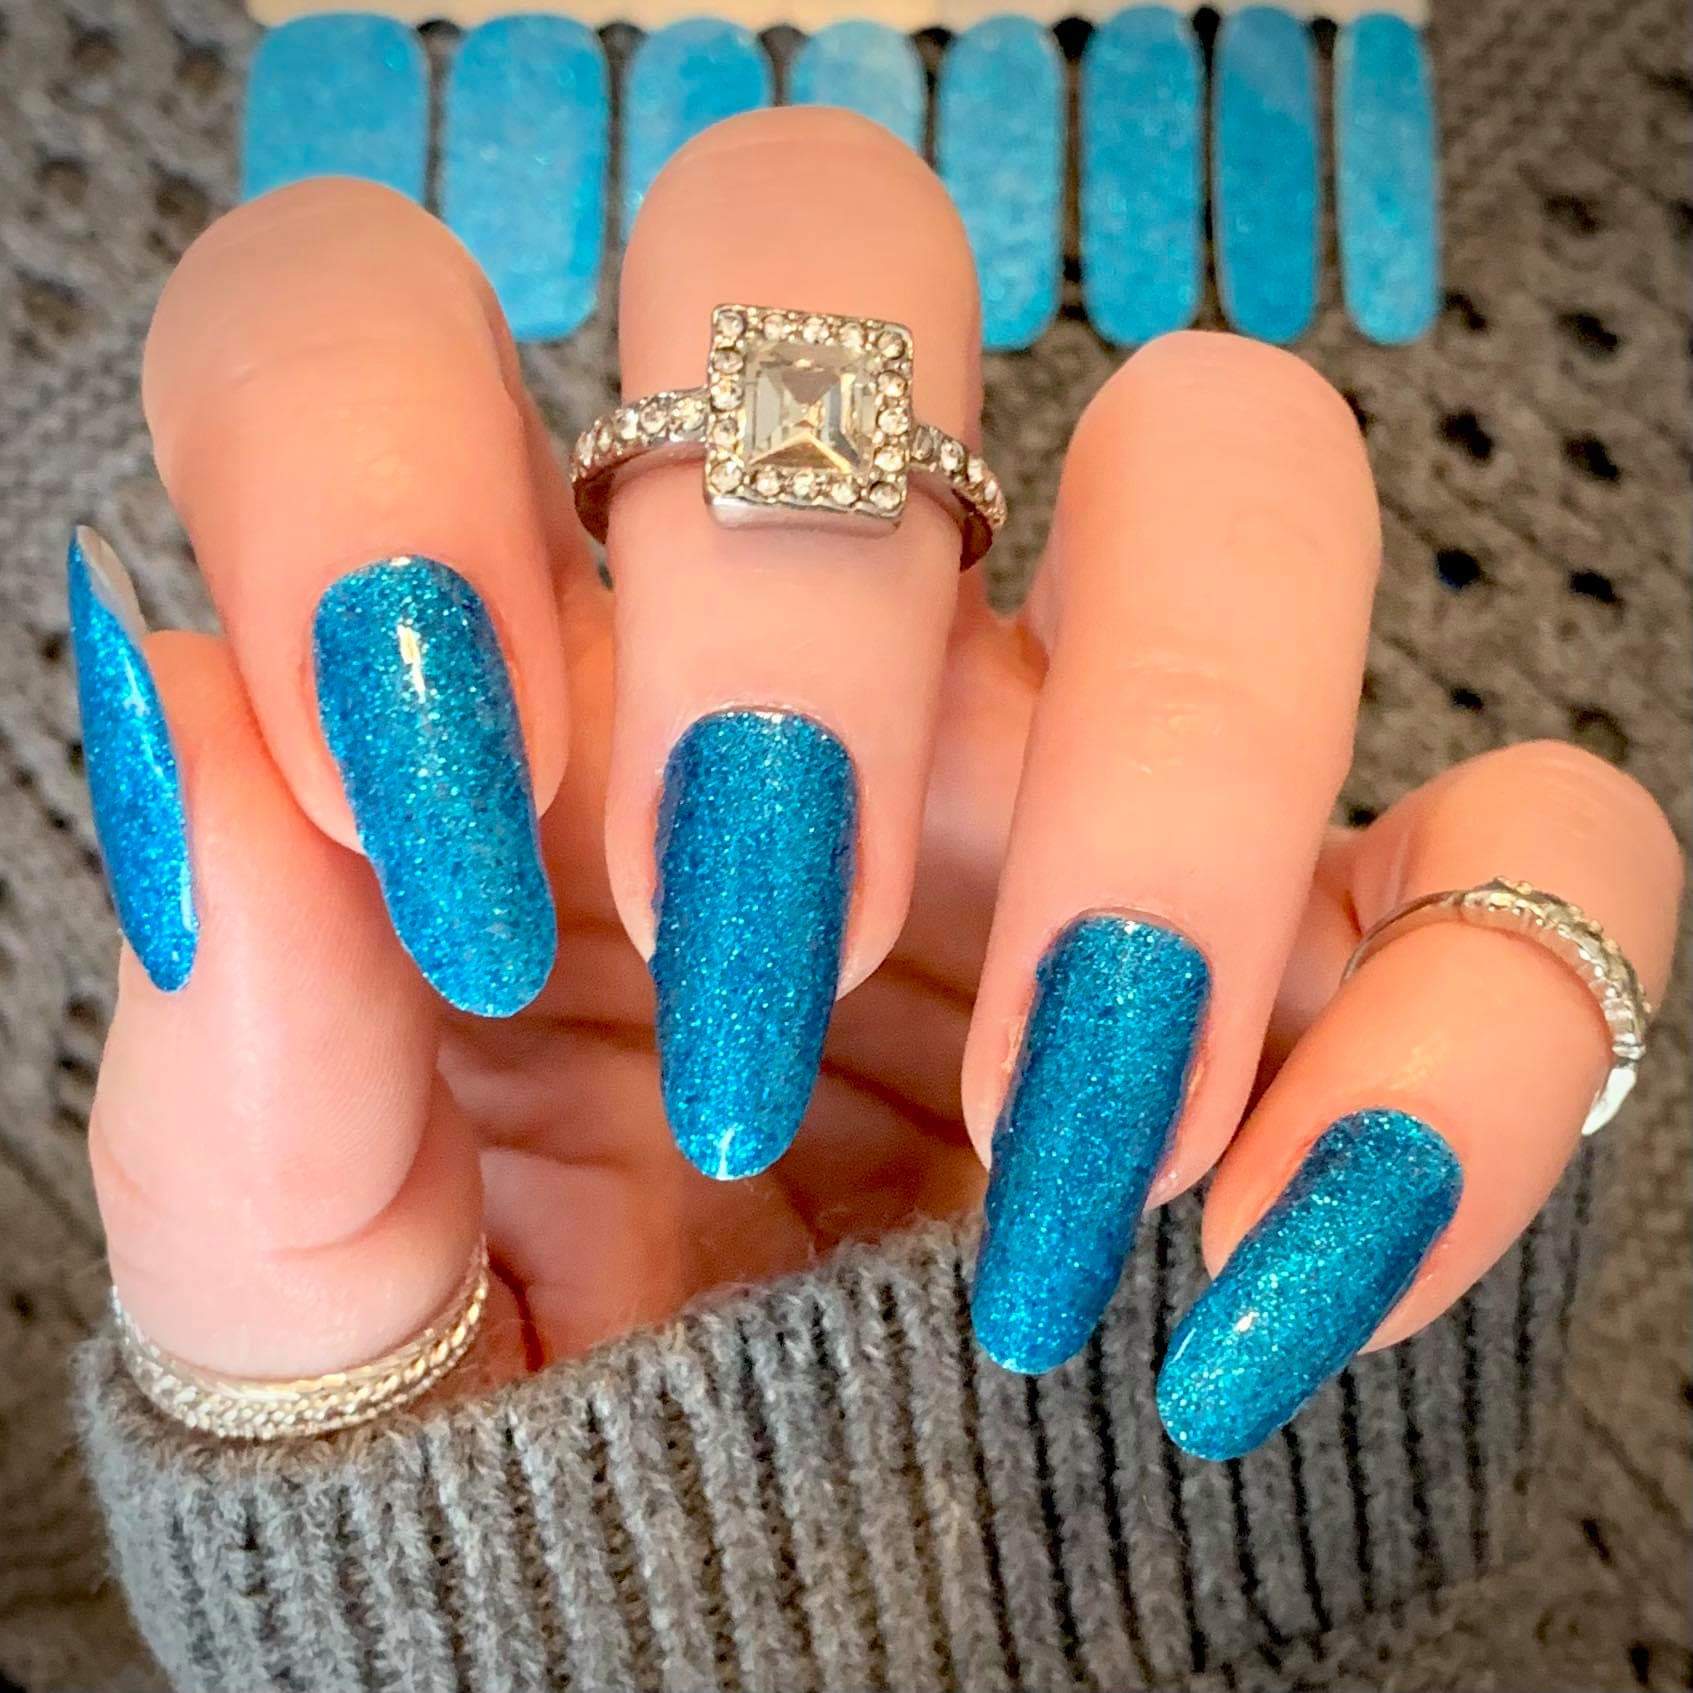 Manicure With Blue And Brown Lacquer Decorated With Beads And Turquoise.  Stock Photo, Picture and Royalty Free Image. Image 53830455.